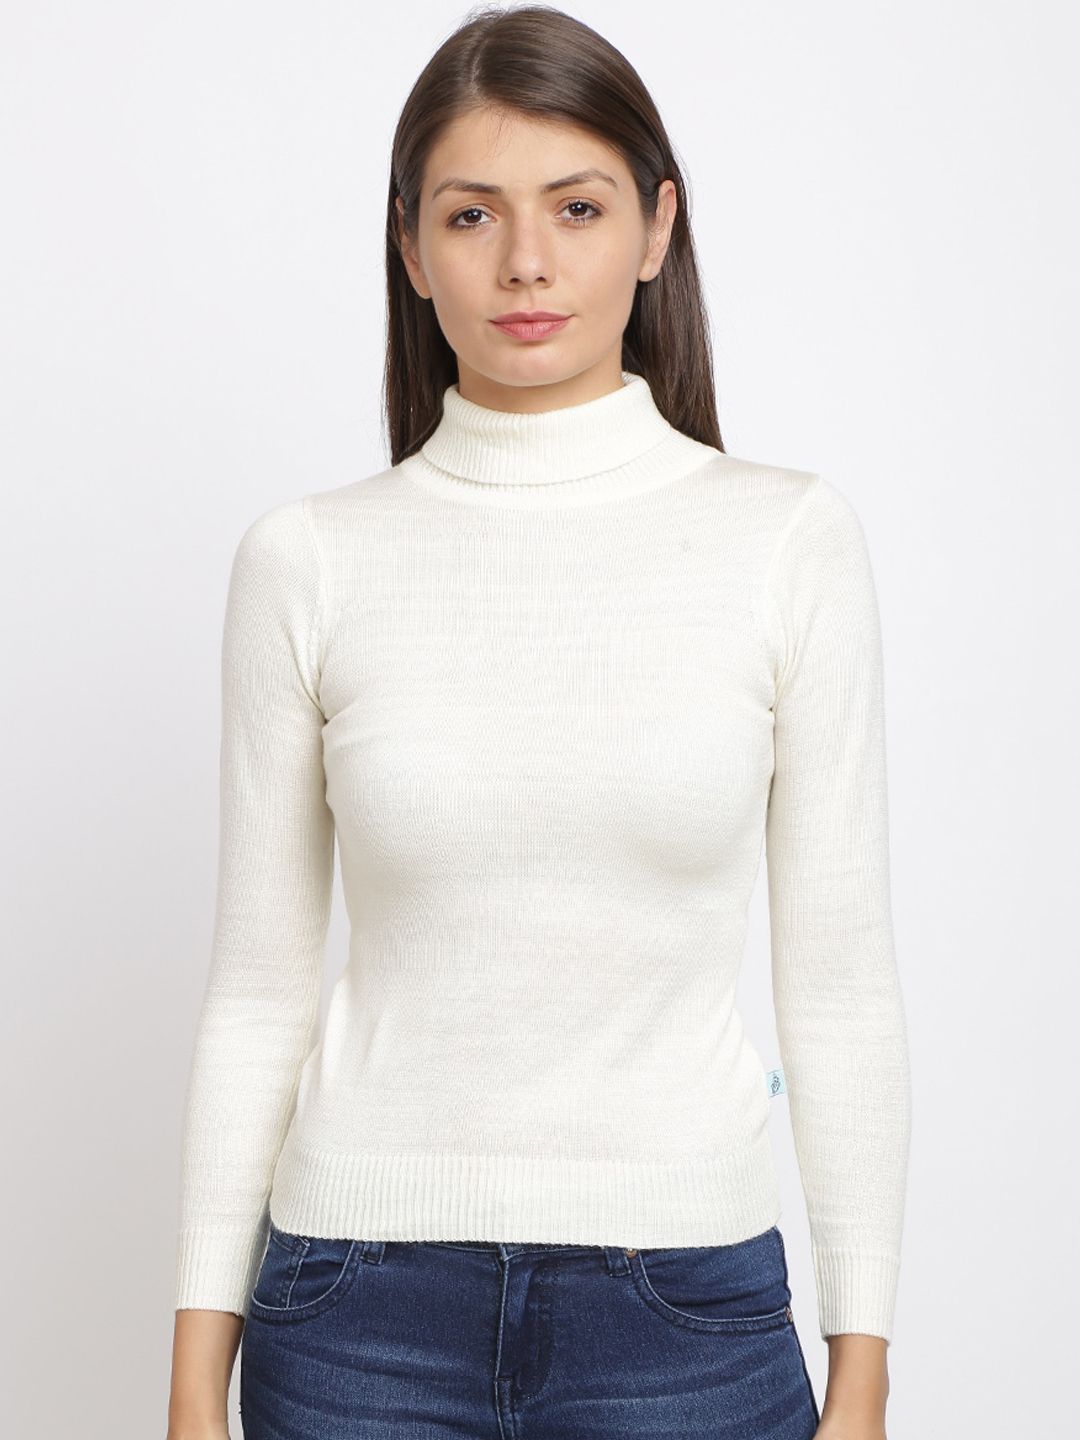 BEVERLY BLUES Women Off White Solid Slim-Fit Pullover Sweater Price in India